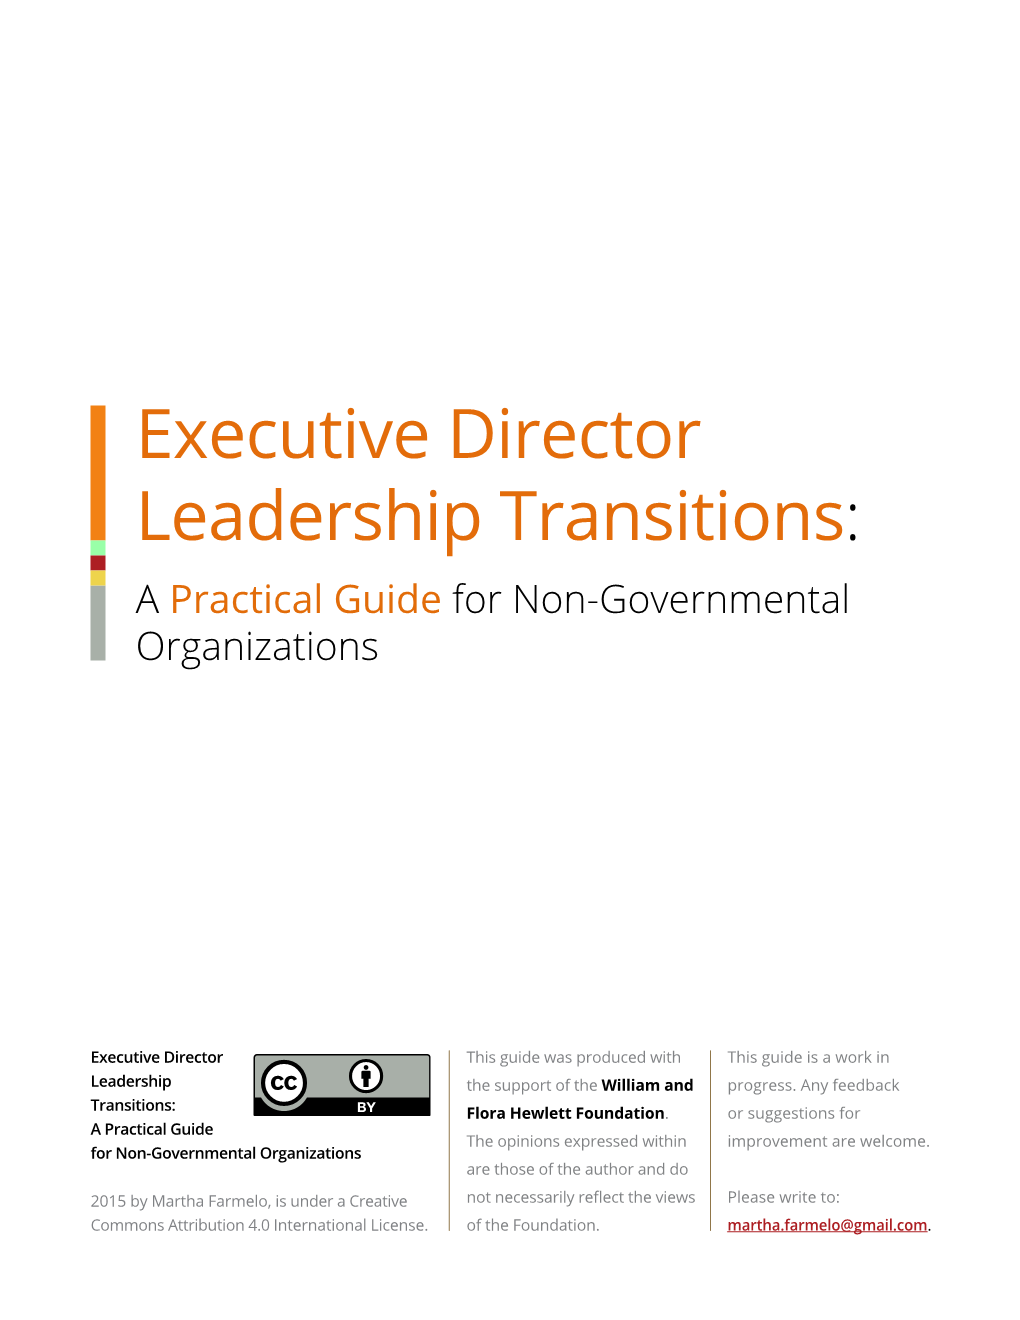 Executive Director Leadership Transitions: a Practical Guide for Non-Governmental Organizations